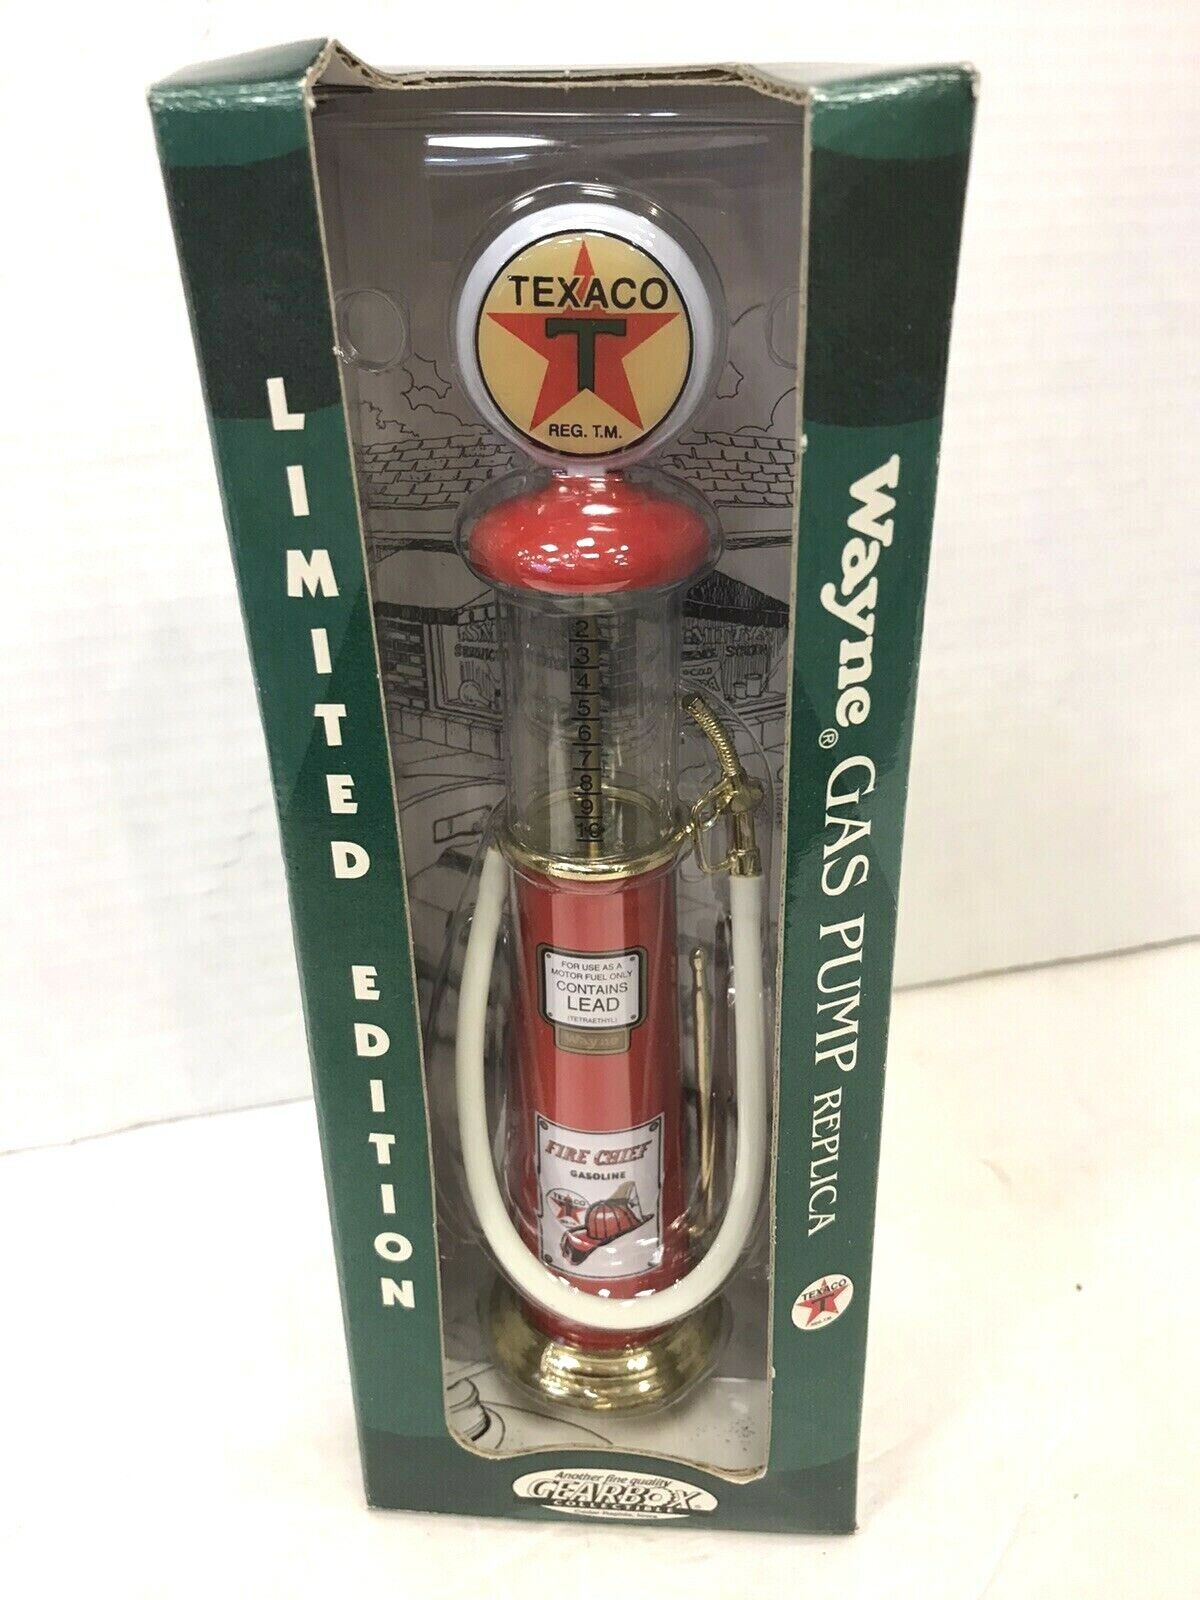 Gearbox Wayne Texaco 8" Replica Gas Pump Limited Edition New In The Box Freeship